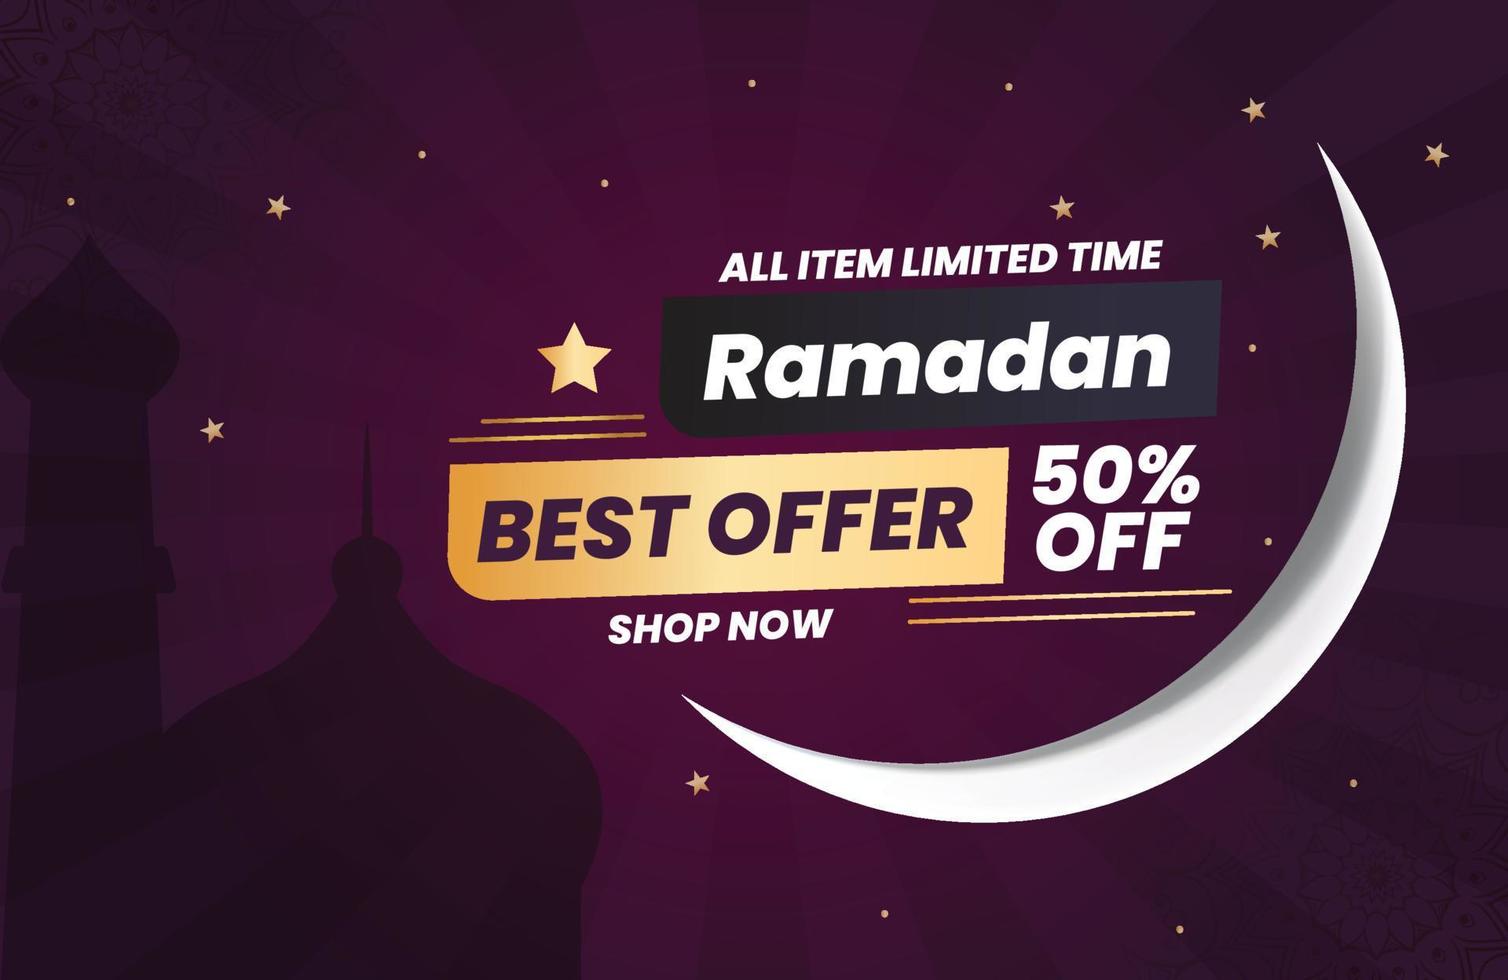 Ramadan Best Offer With 50 Off All Item And Social Media Islamic Theme, Crescent Moon And Stars. vector